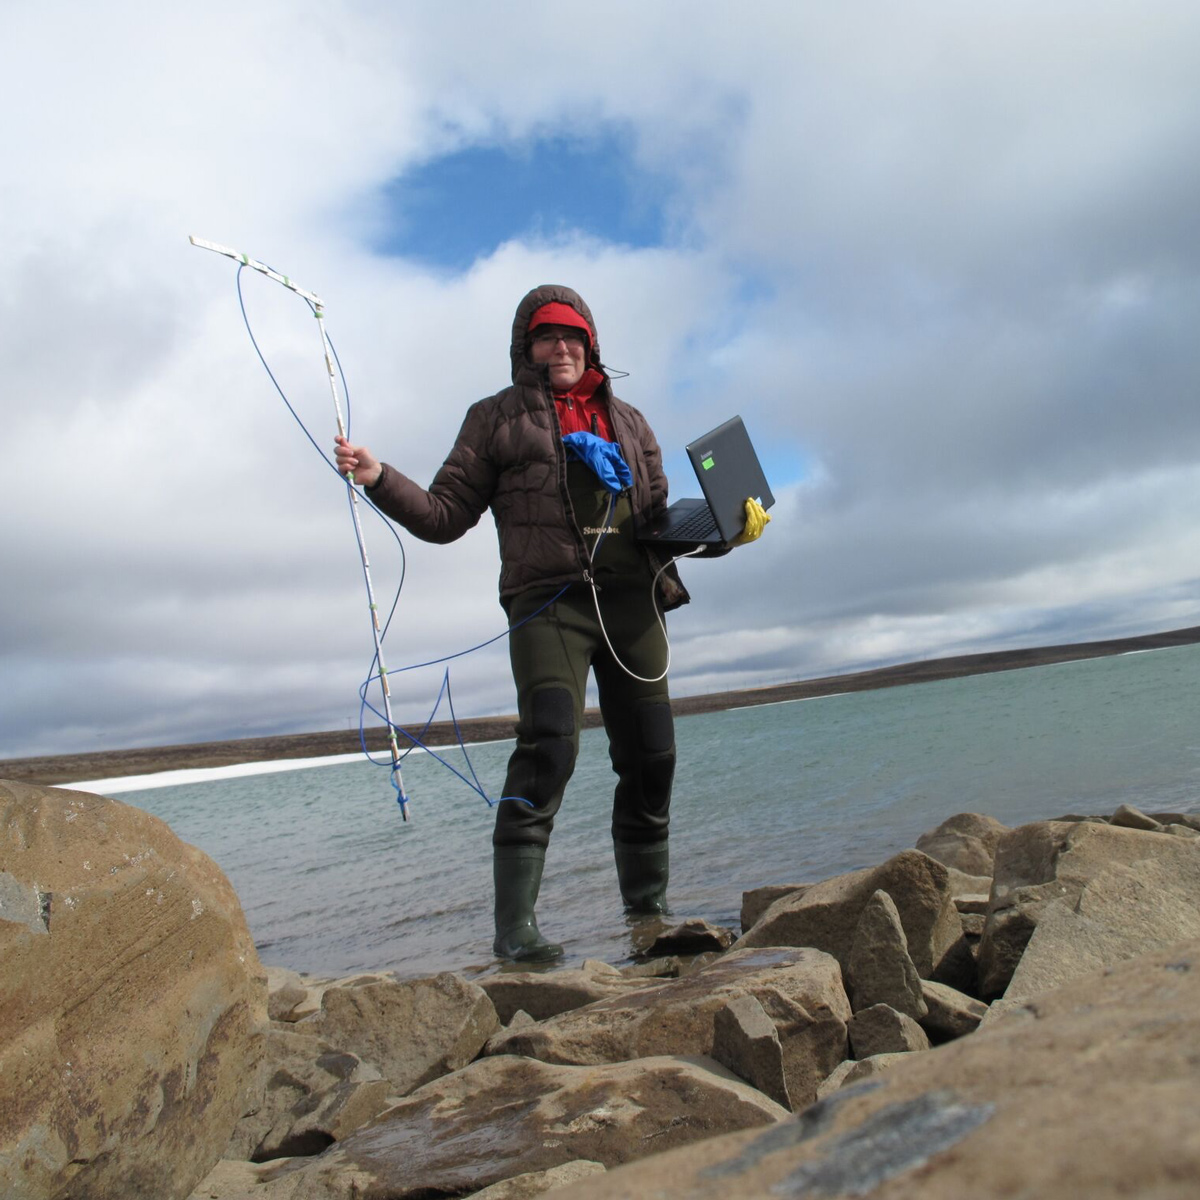 Dr. Jenny Boughman conducting research in Iceland